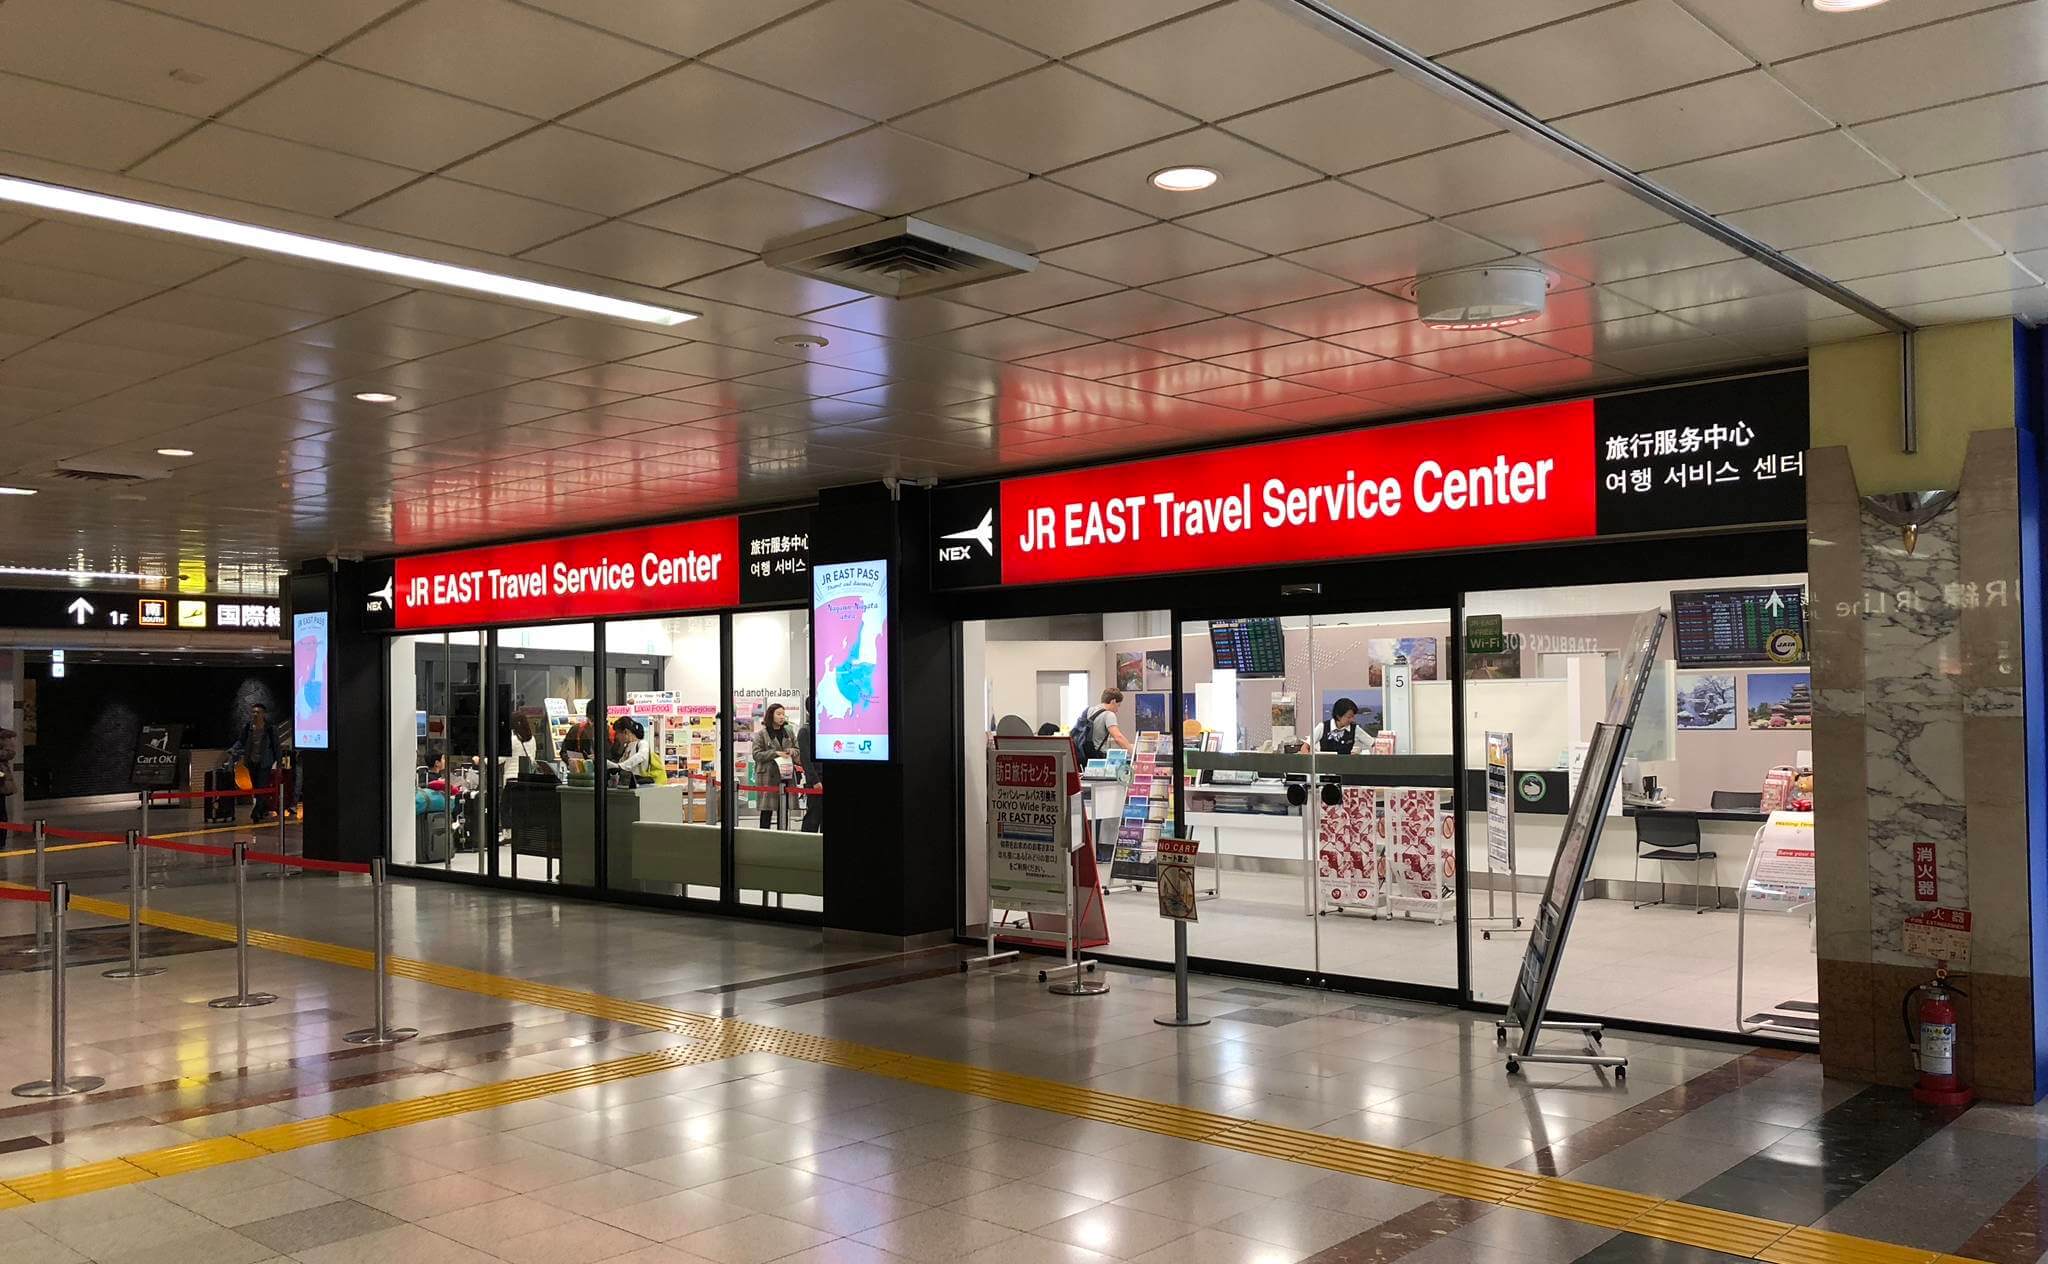 Tokyo Airport how to get from tokyo airport to city,how to get from tokyo airport to city centre,how to get from tokyo haneda airport to city,